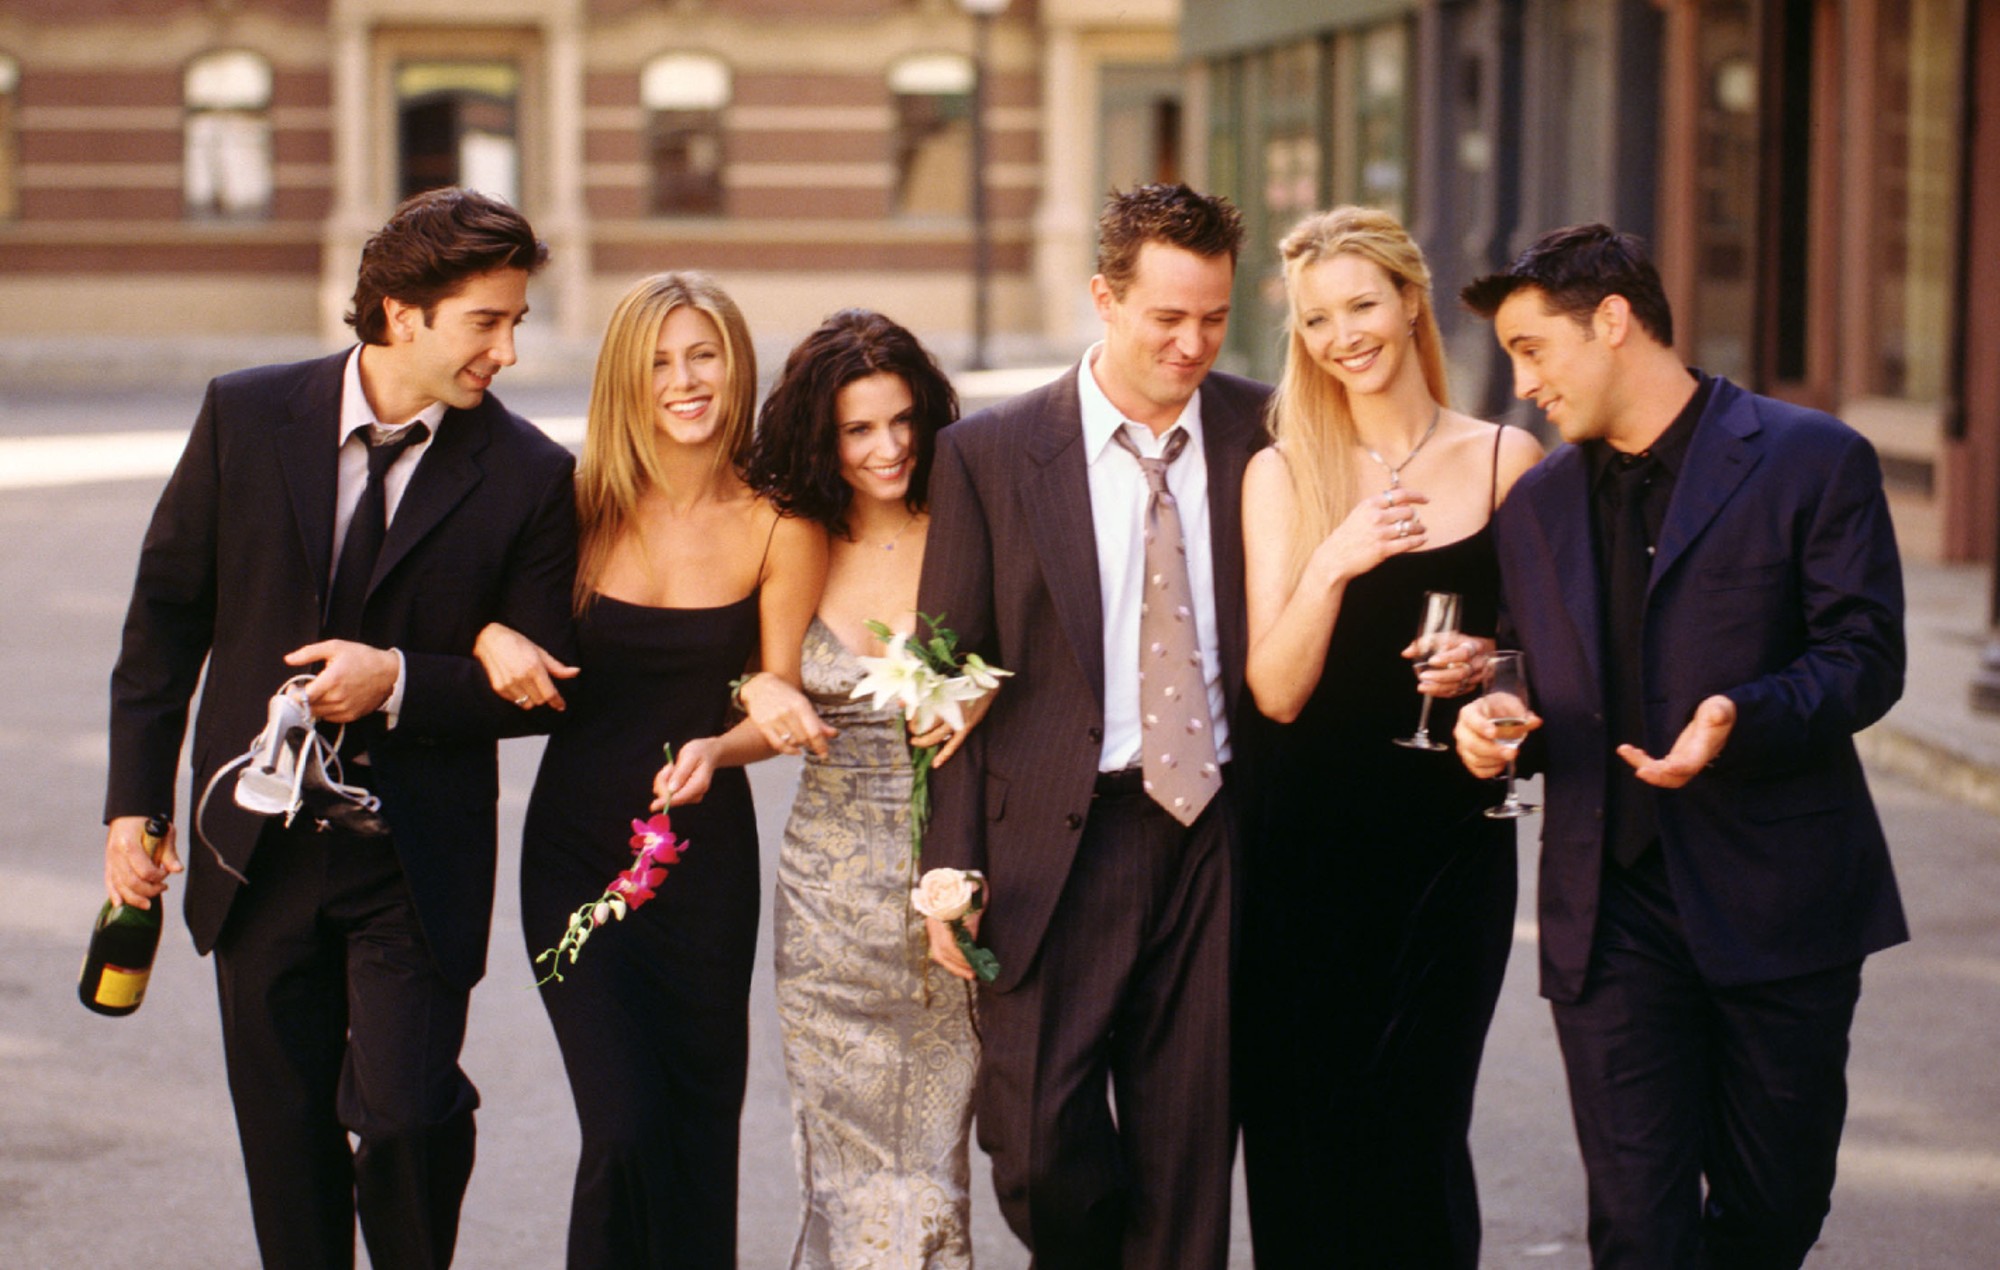 Where to watch ‘Friends’ in the UK